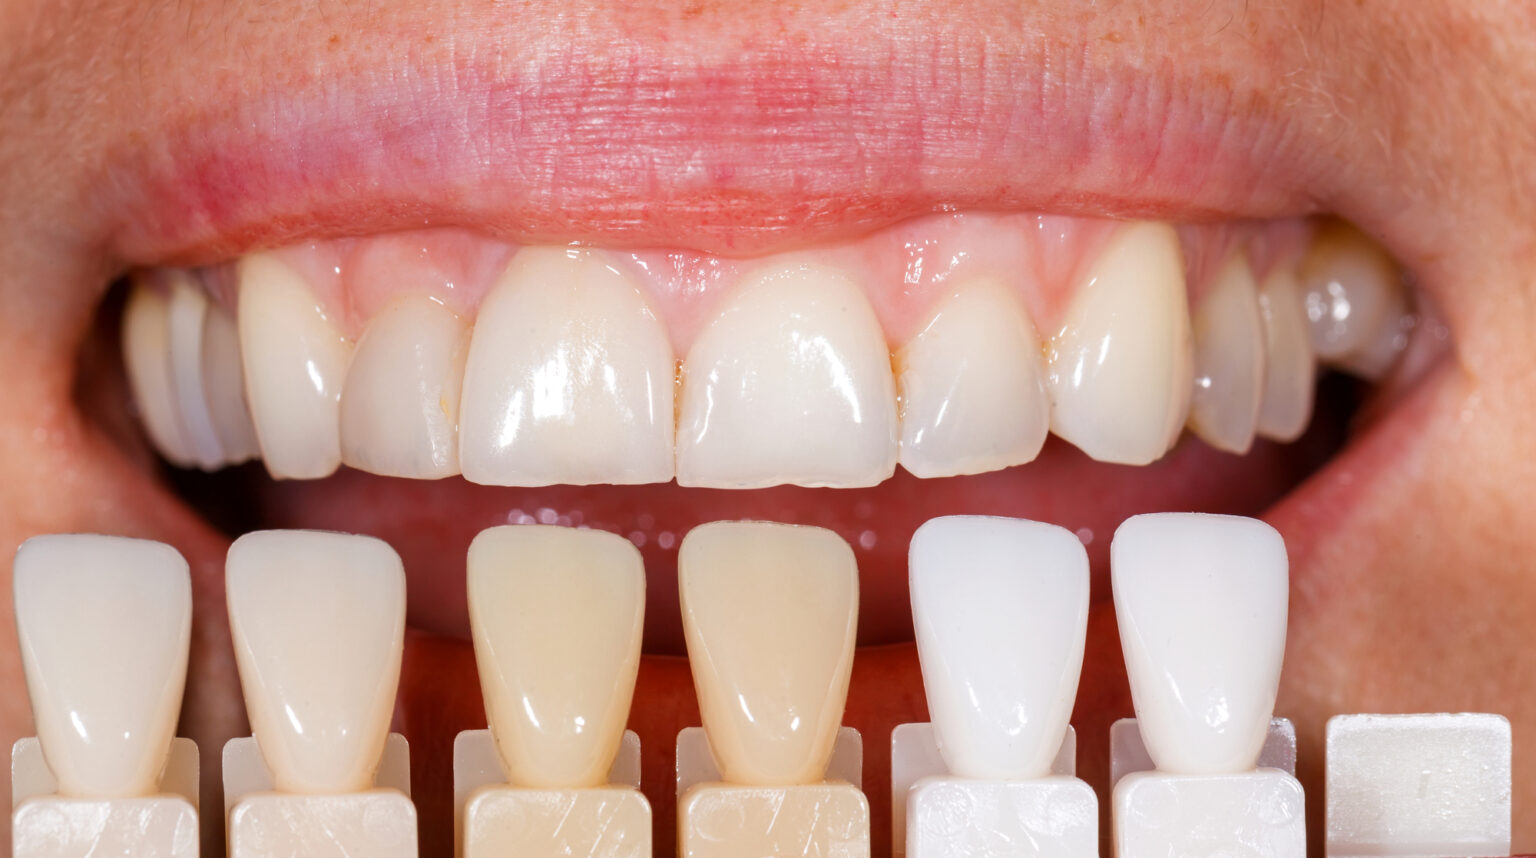 Close-up of a person's teeth being compared with a dental shade guide at a dental clinic.